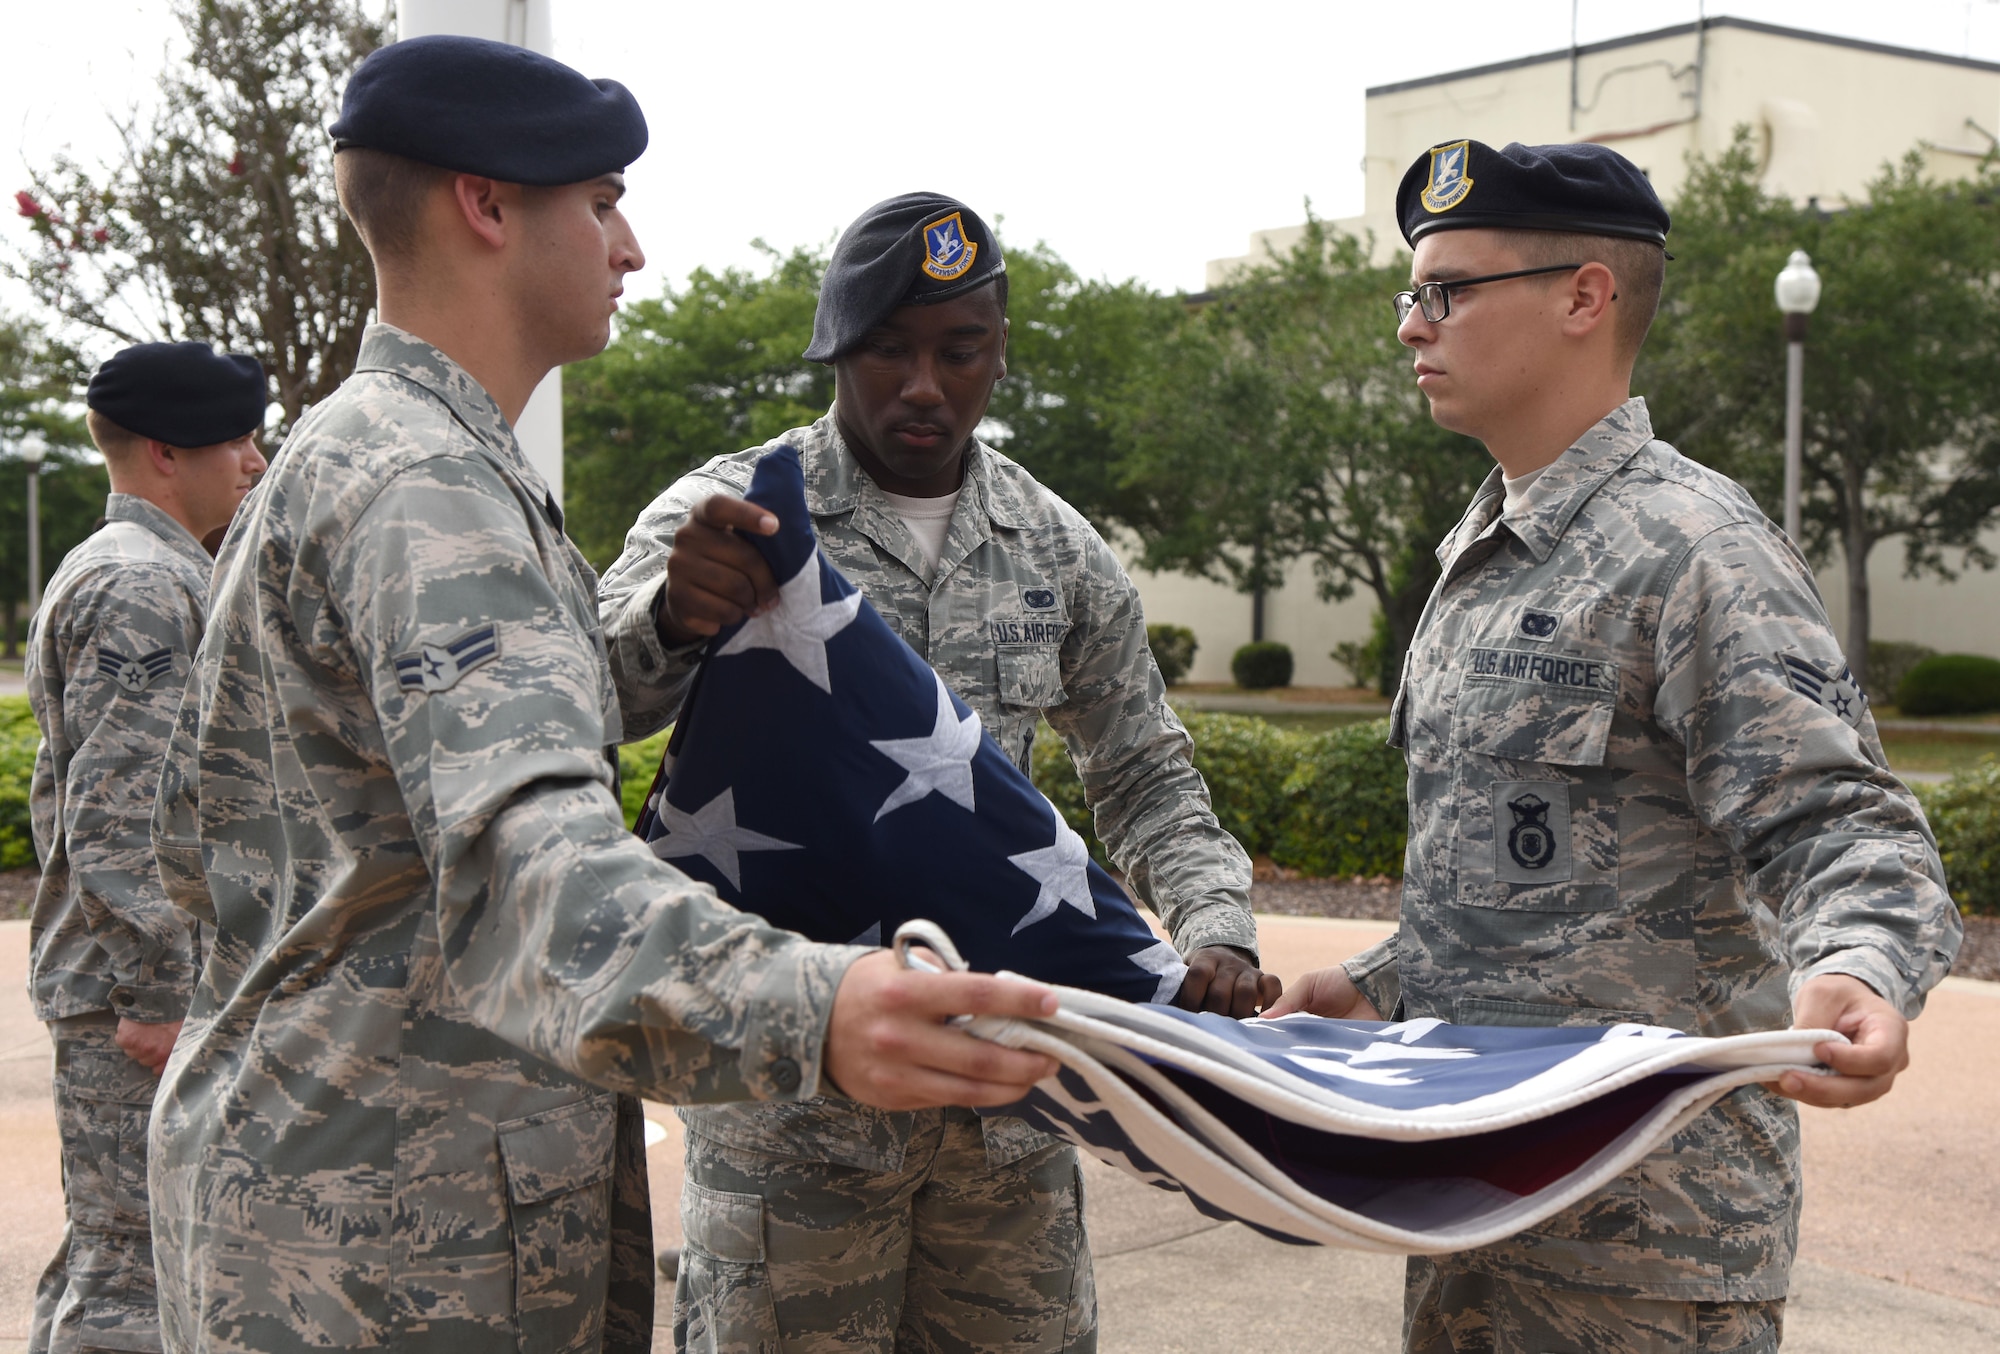 Members of the 81st Security Forces Squadron conduct a flag folding ceremony during the 81st SFS retreat ceremony May 18, 2017, on Keesler Air Force Base, Miss. The event was held during National Police Week, which recognizes the service of law enforcement men and women who put their lives at risk every day. (U.S. Air Force photo by Kemberly Groue)